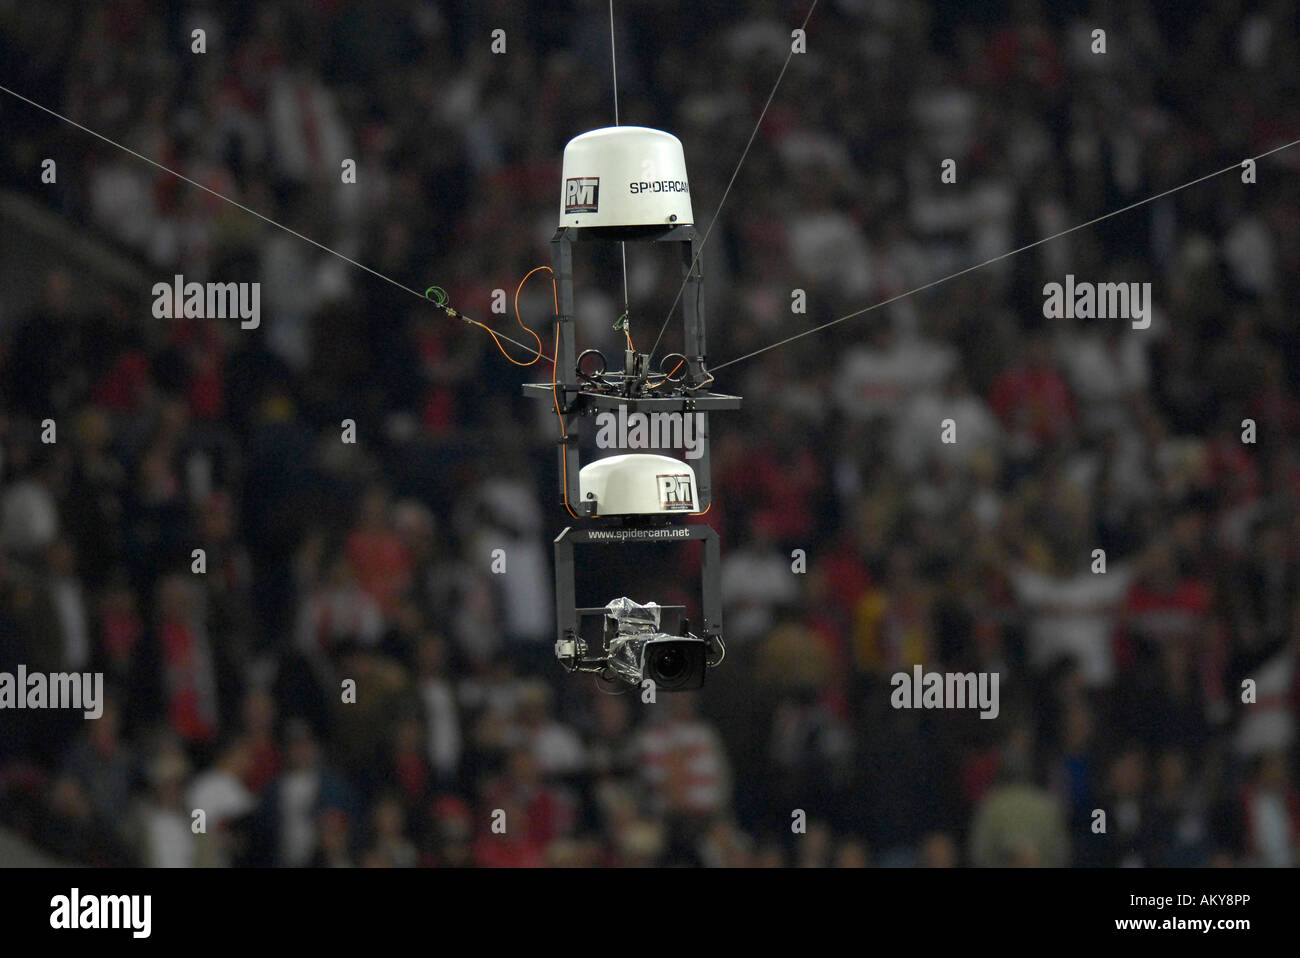 Spidercam special camera for bird's view in arenas Stock Photo